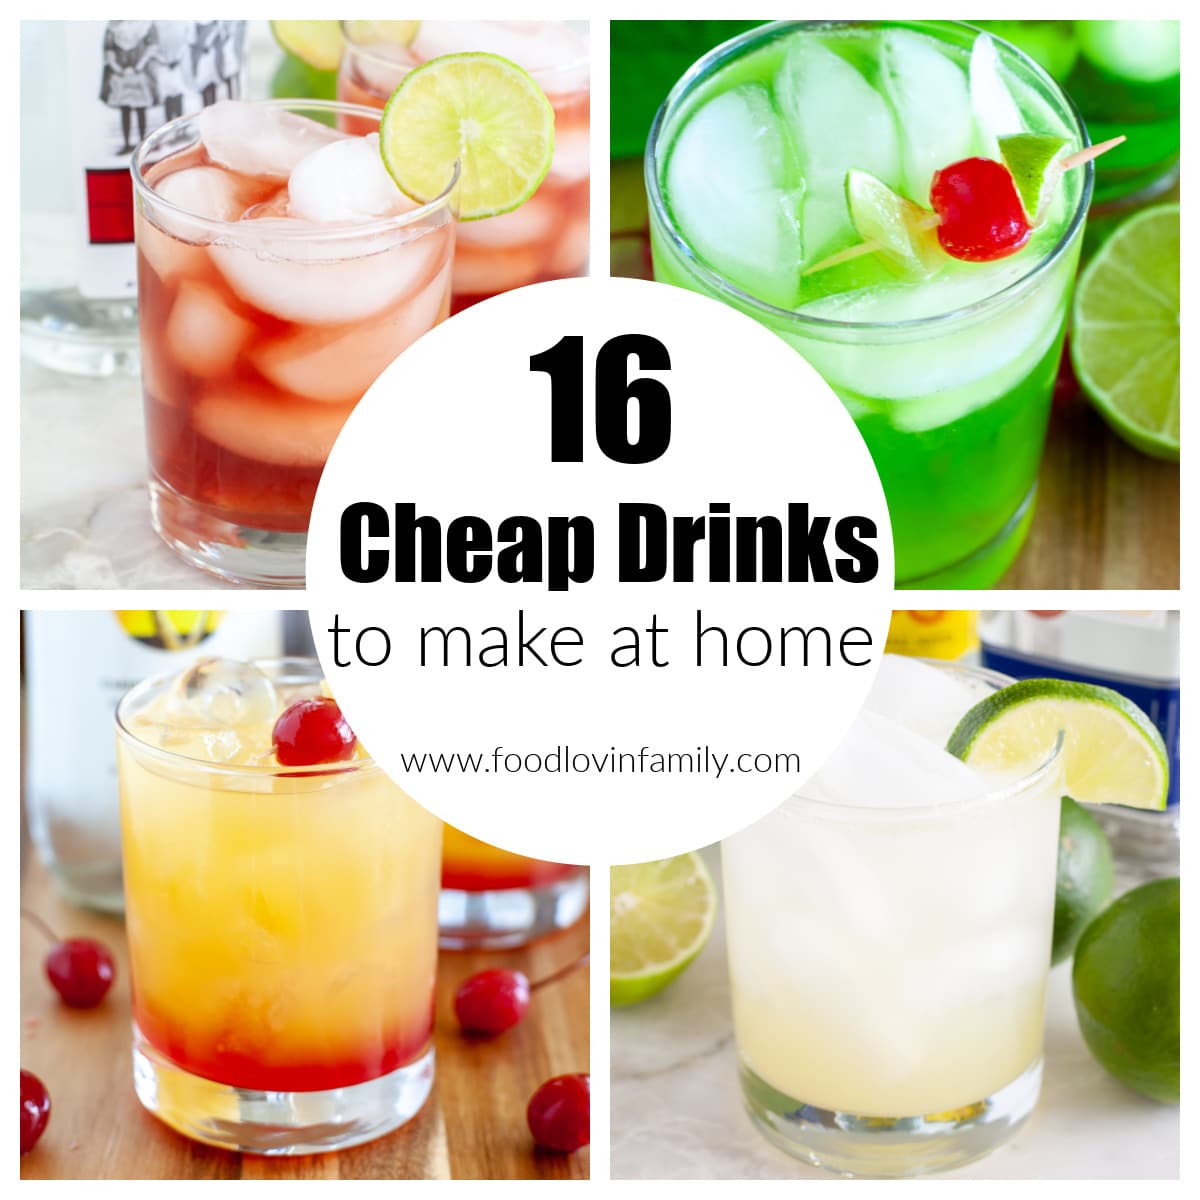 Affordable drink discounts